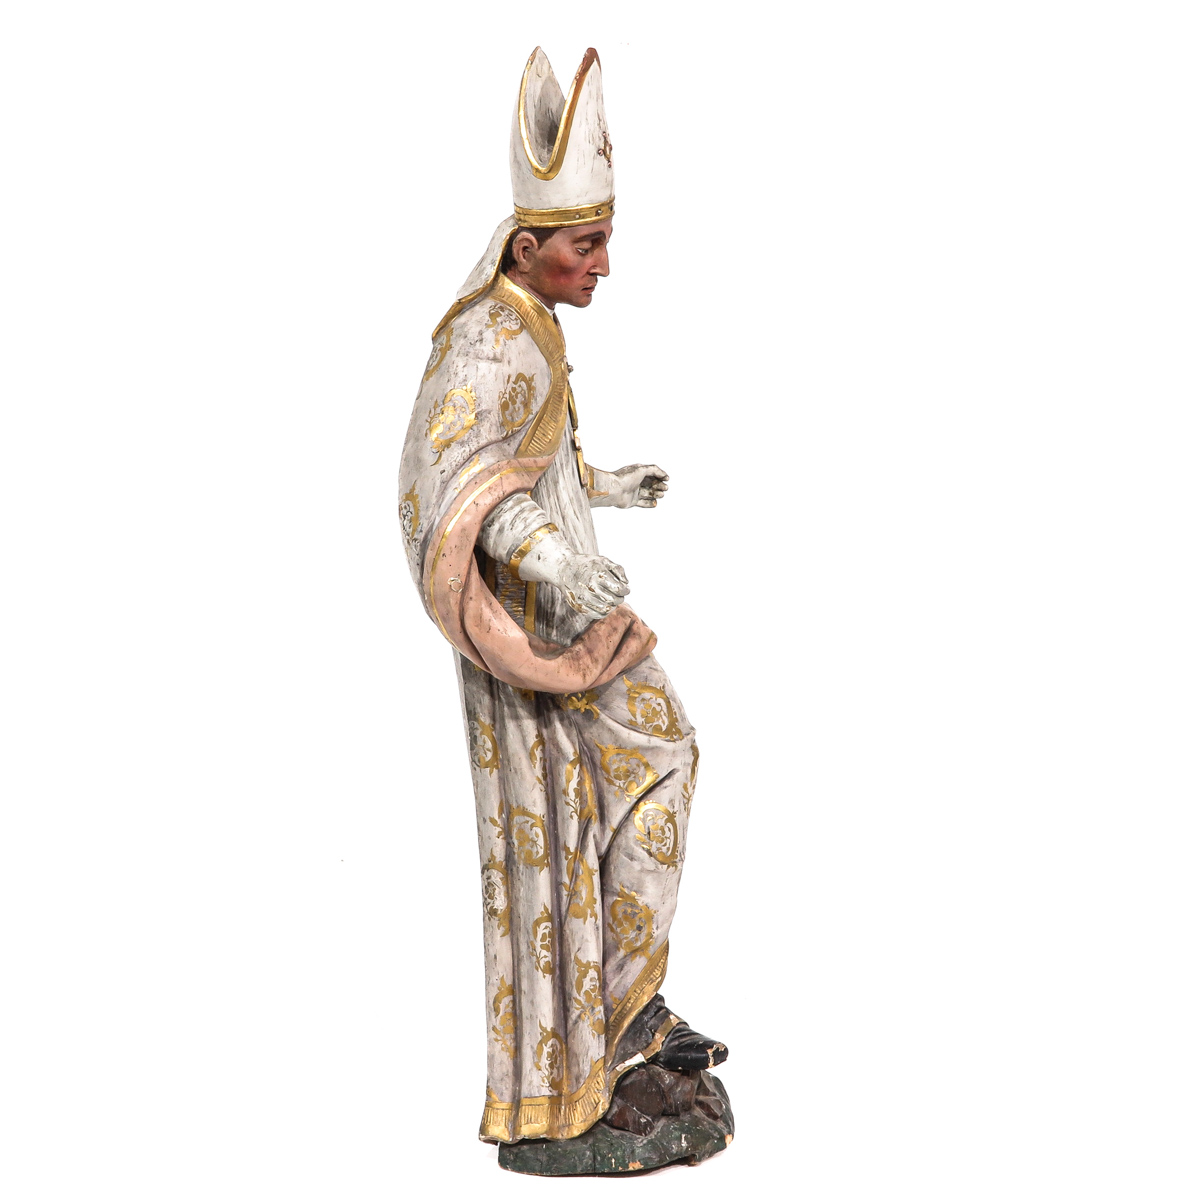 A Religious Wood Sculpture of a Pope - Image 4 of 10